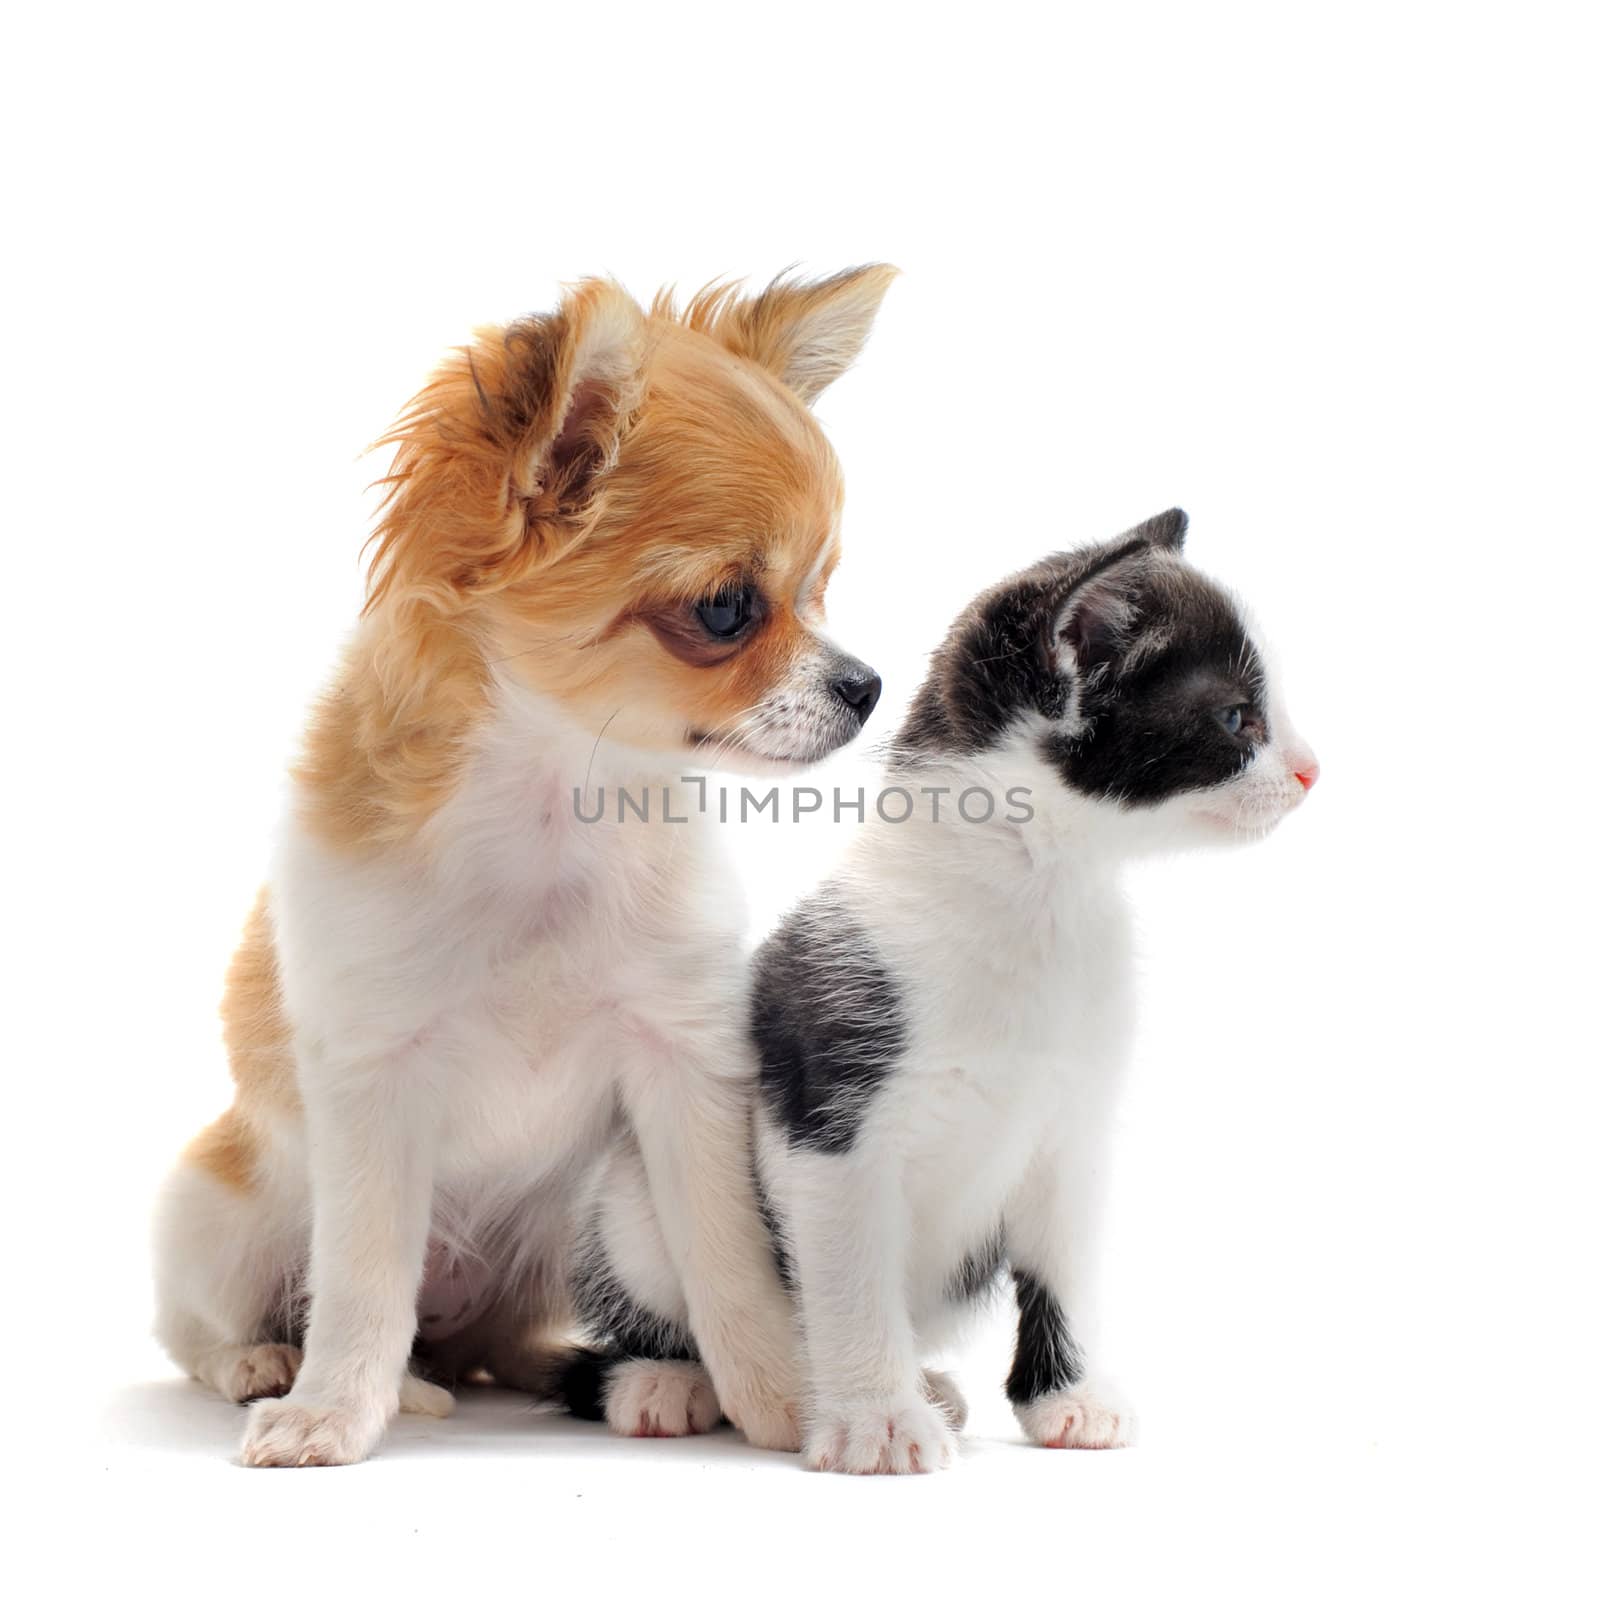 puppy chihuahua and kitten by cynoclub